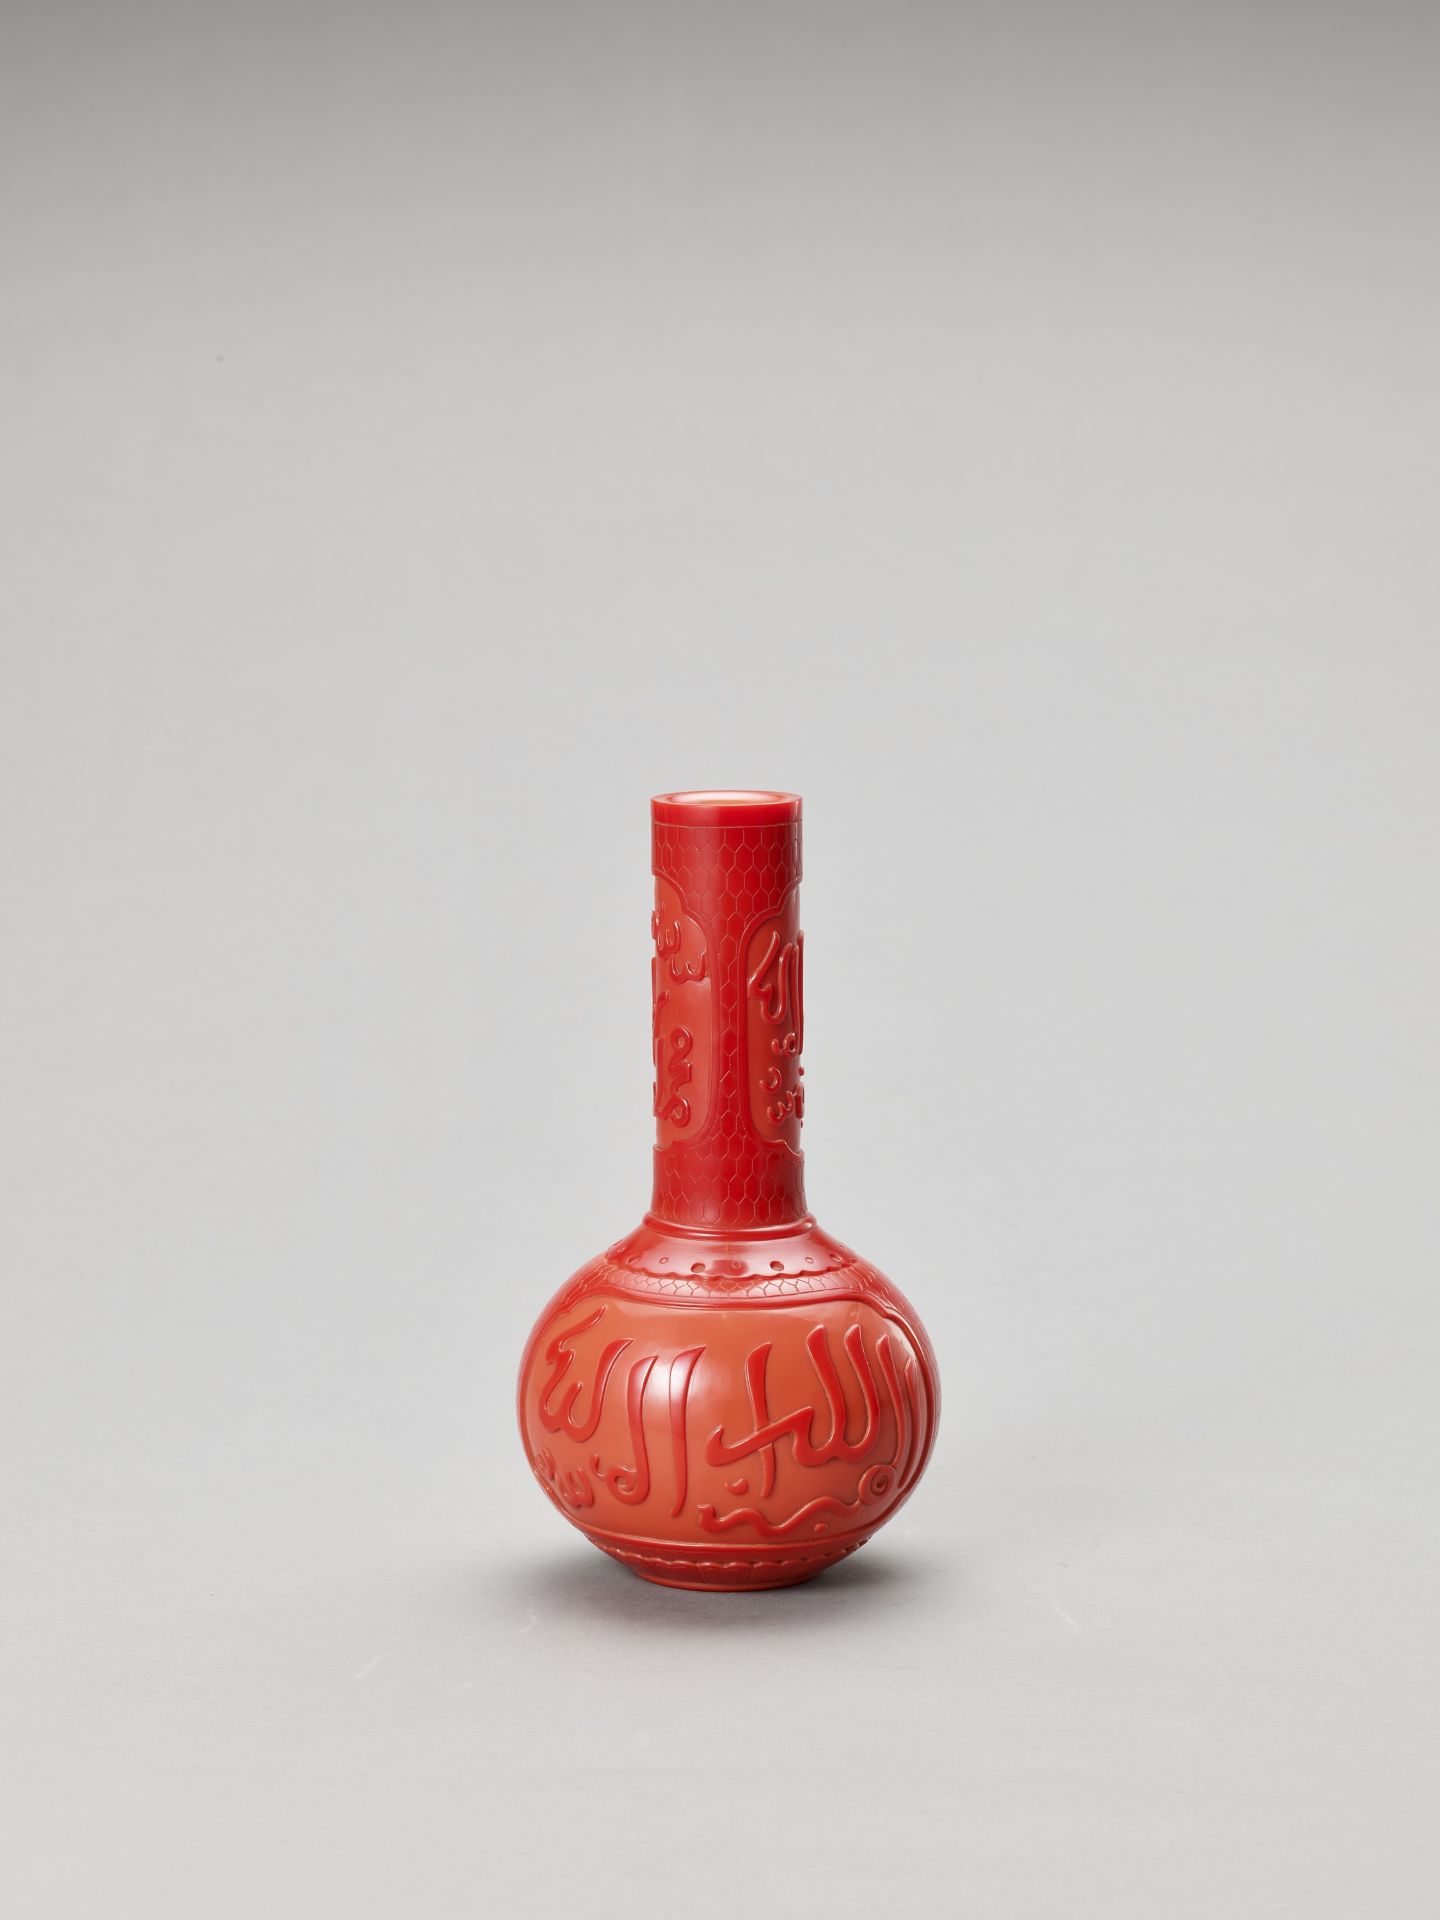 A RED PEKING GLASS BOTTLE VASE FOR THE ISLAMIC MARKET - Image 2 of 7